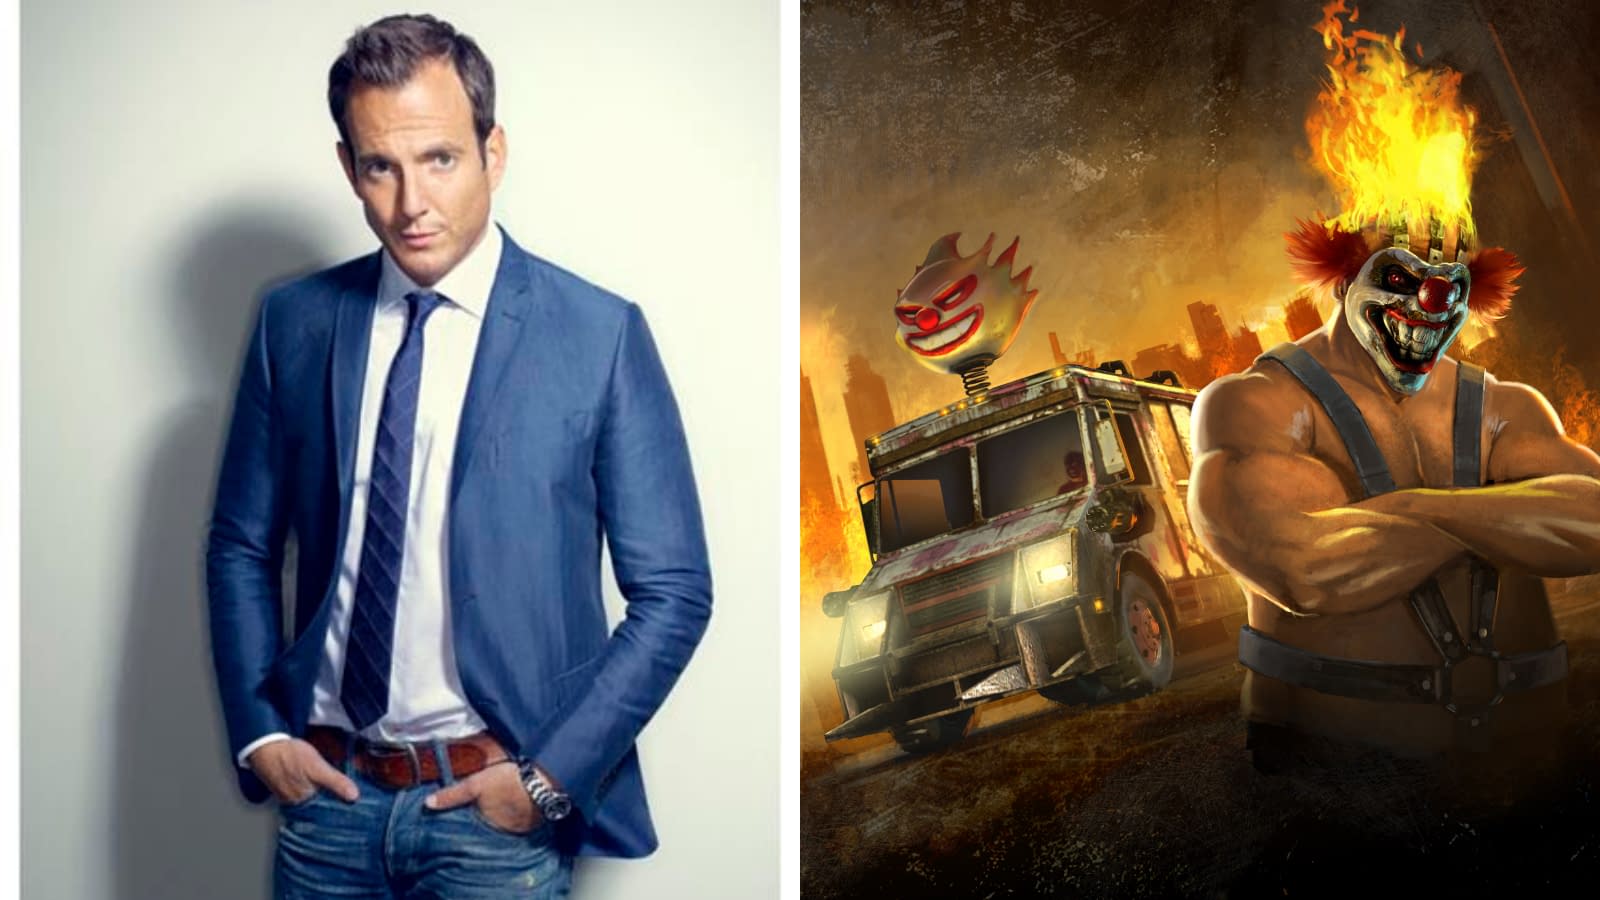 Captain America takes on Sweet Tooth in Twisted Metal series